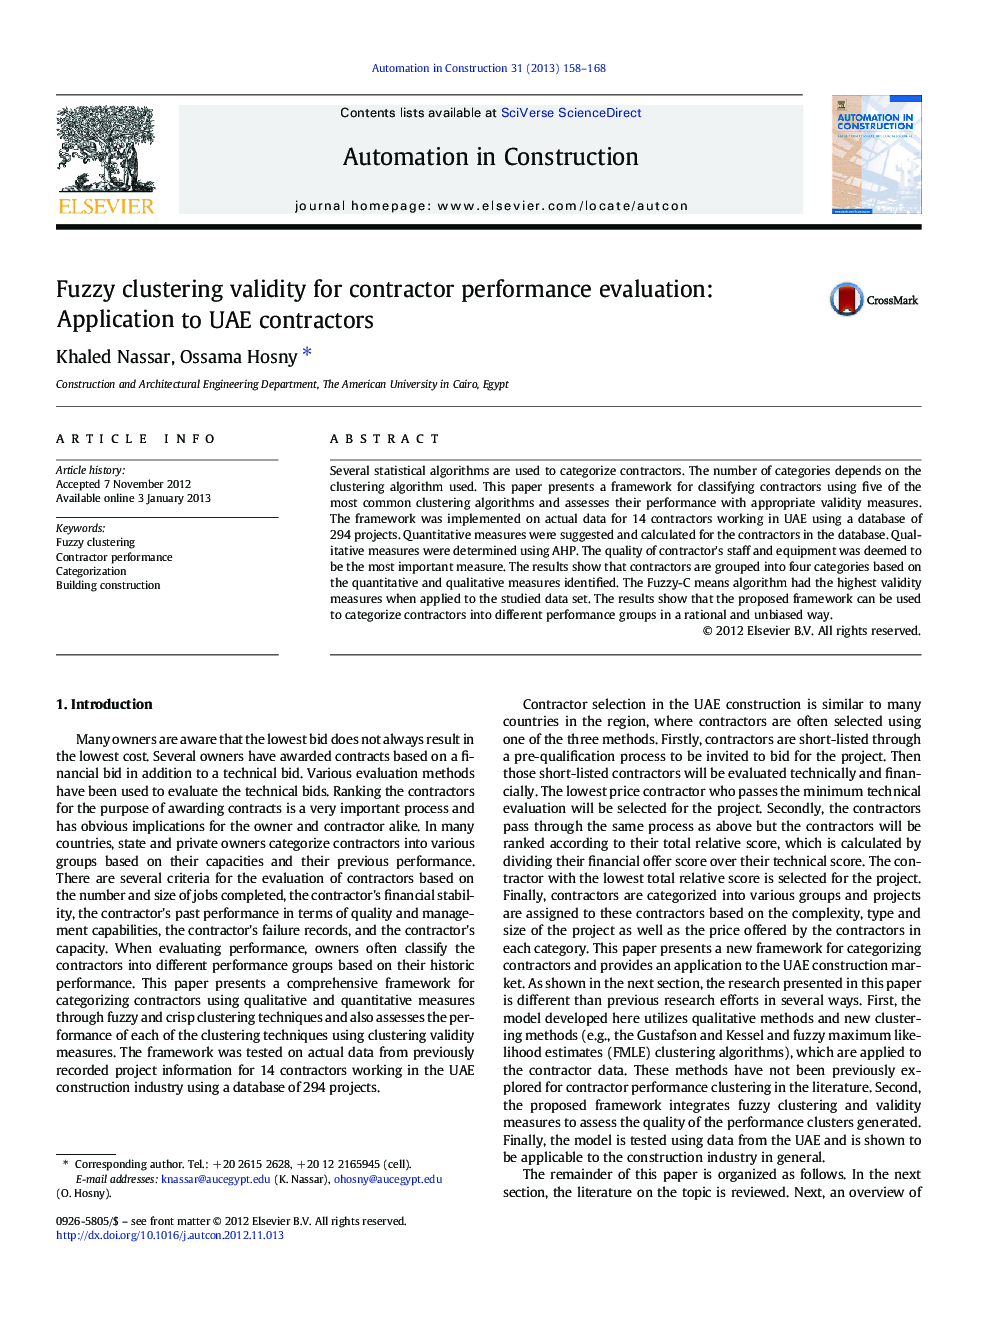 Fuzzy clustering validity for contractor performance evaluation: Application to UAE contractors